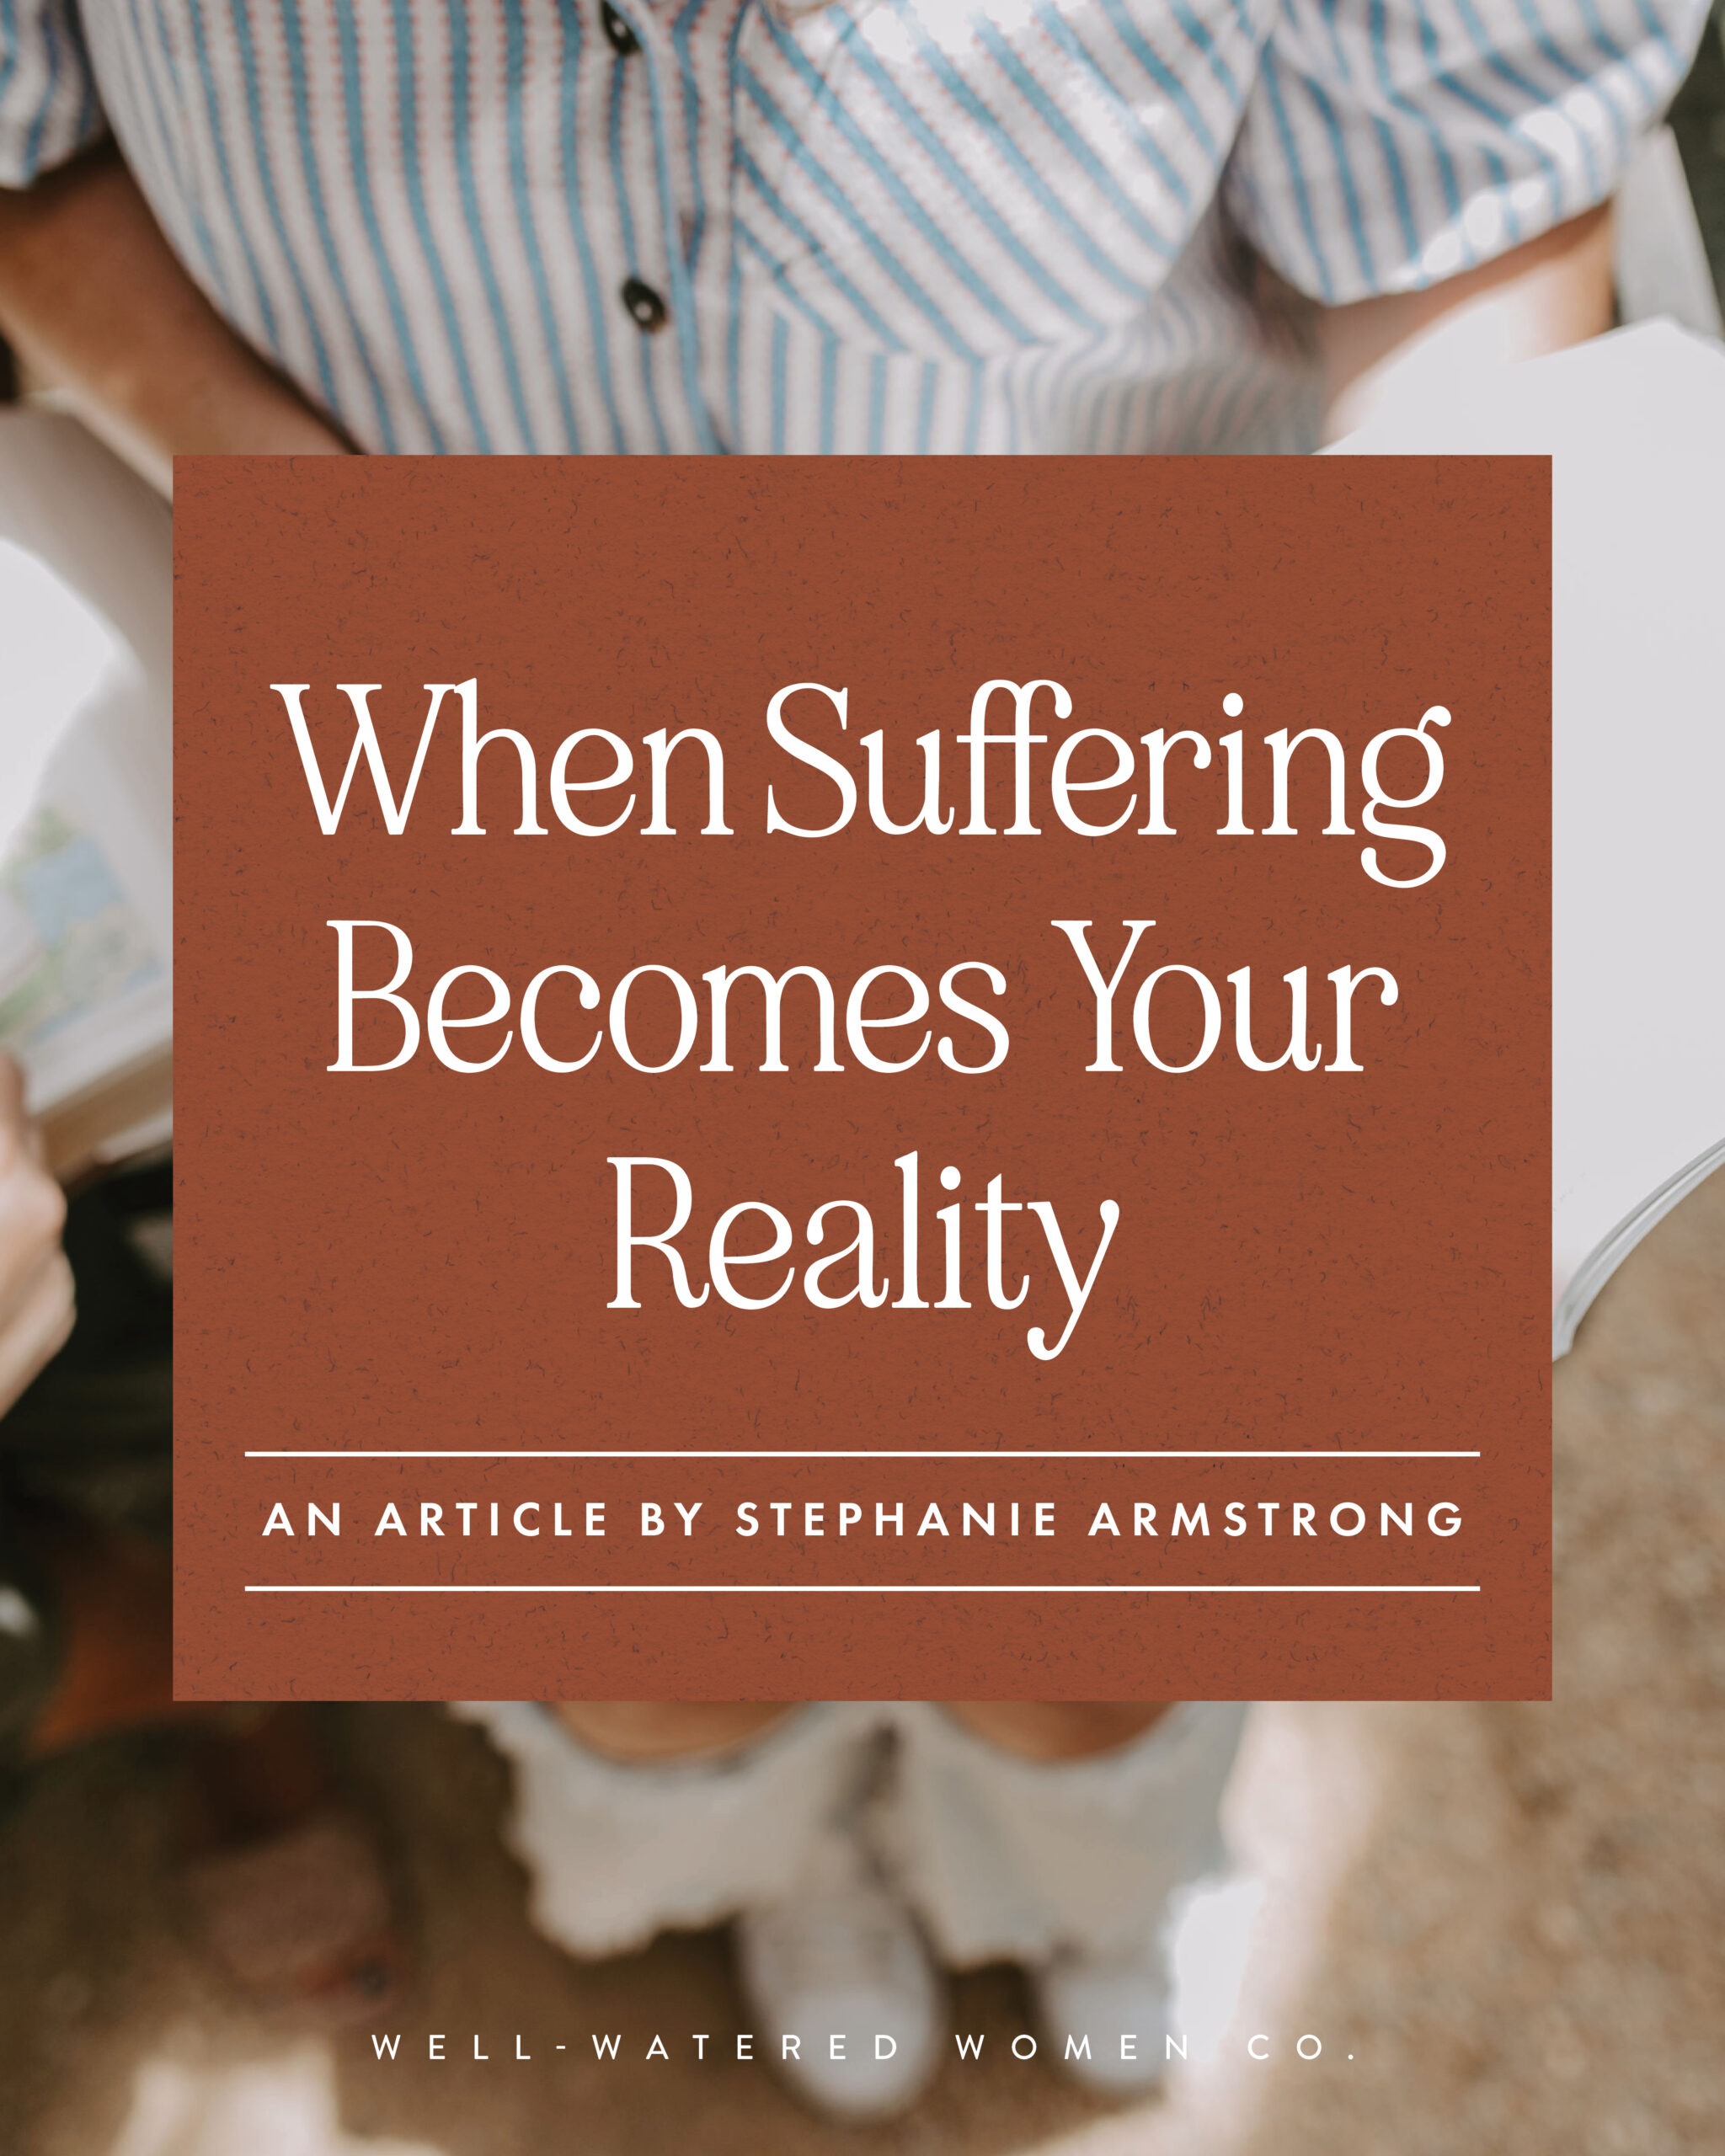 When Suffering Becomes Your Reality – an article from Well-Watered Women